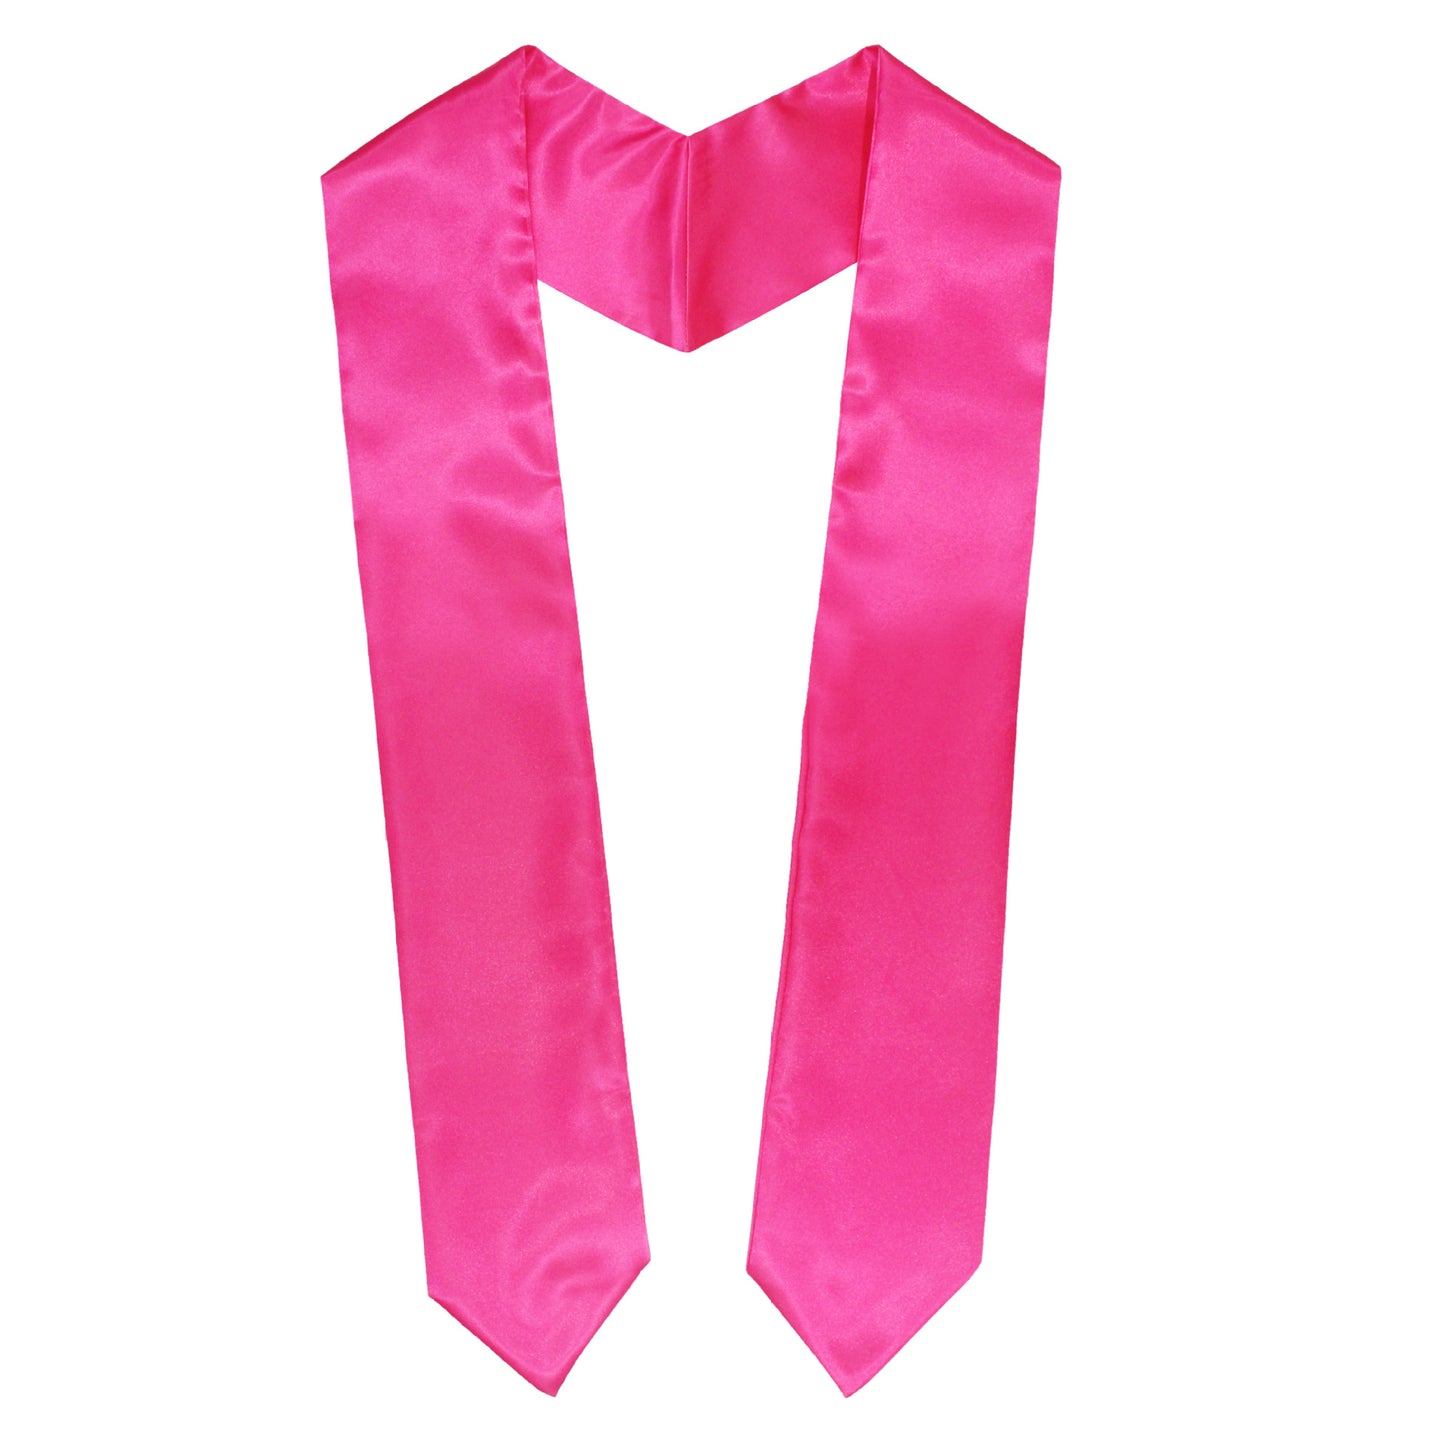 Blank Graduation Stole for Sublimation 12x173cm in 4 colors